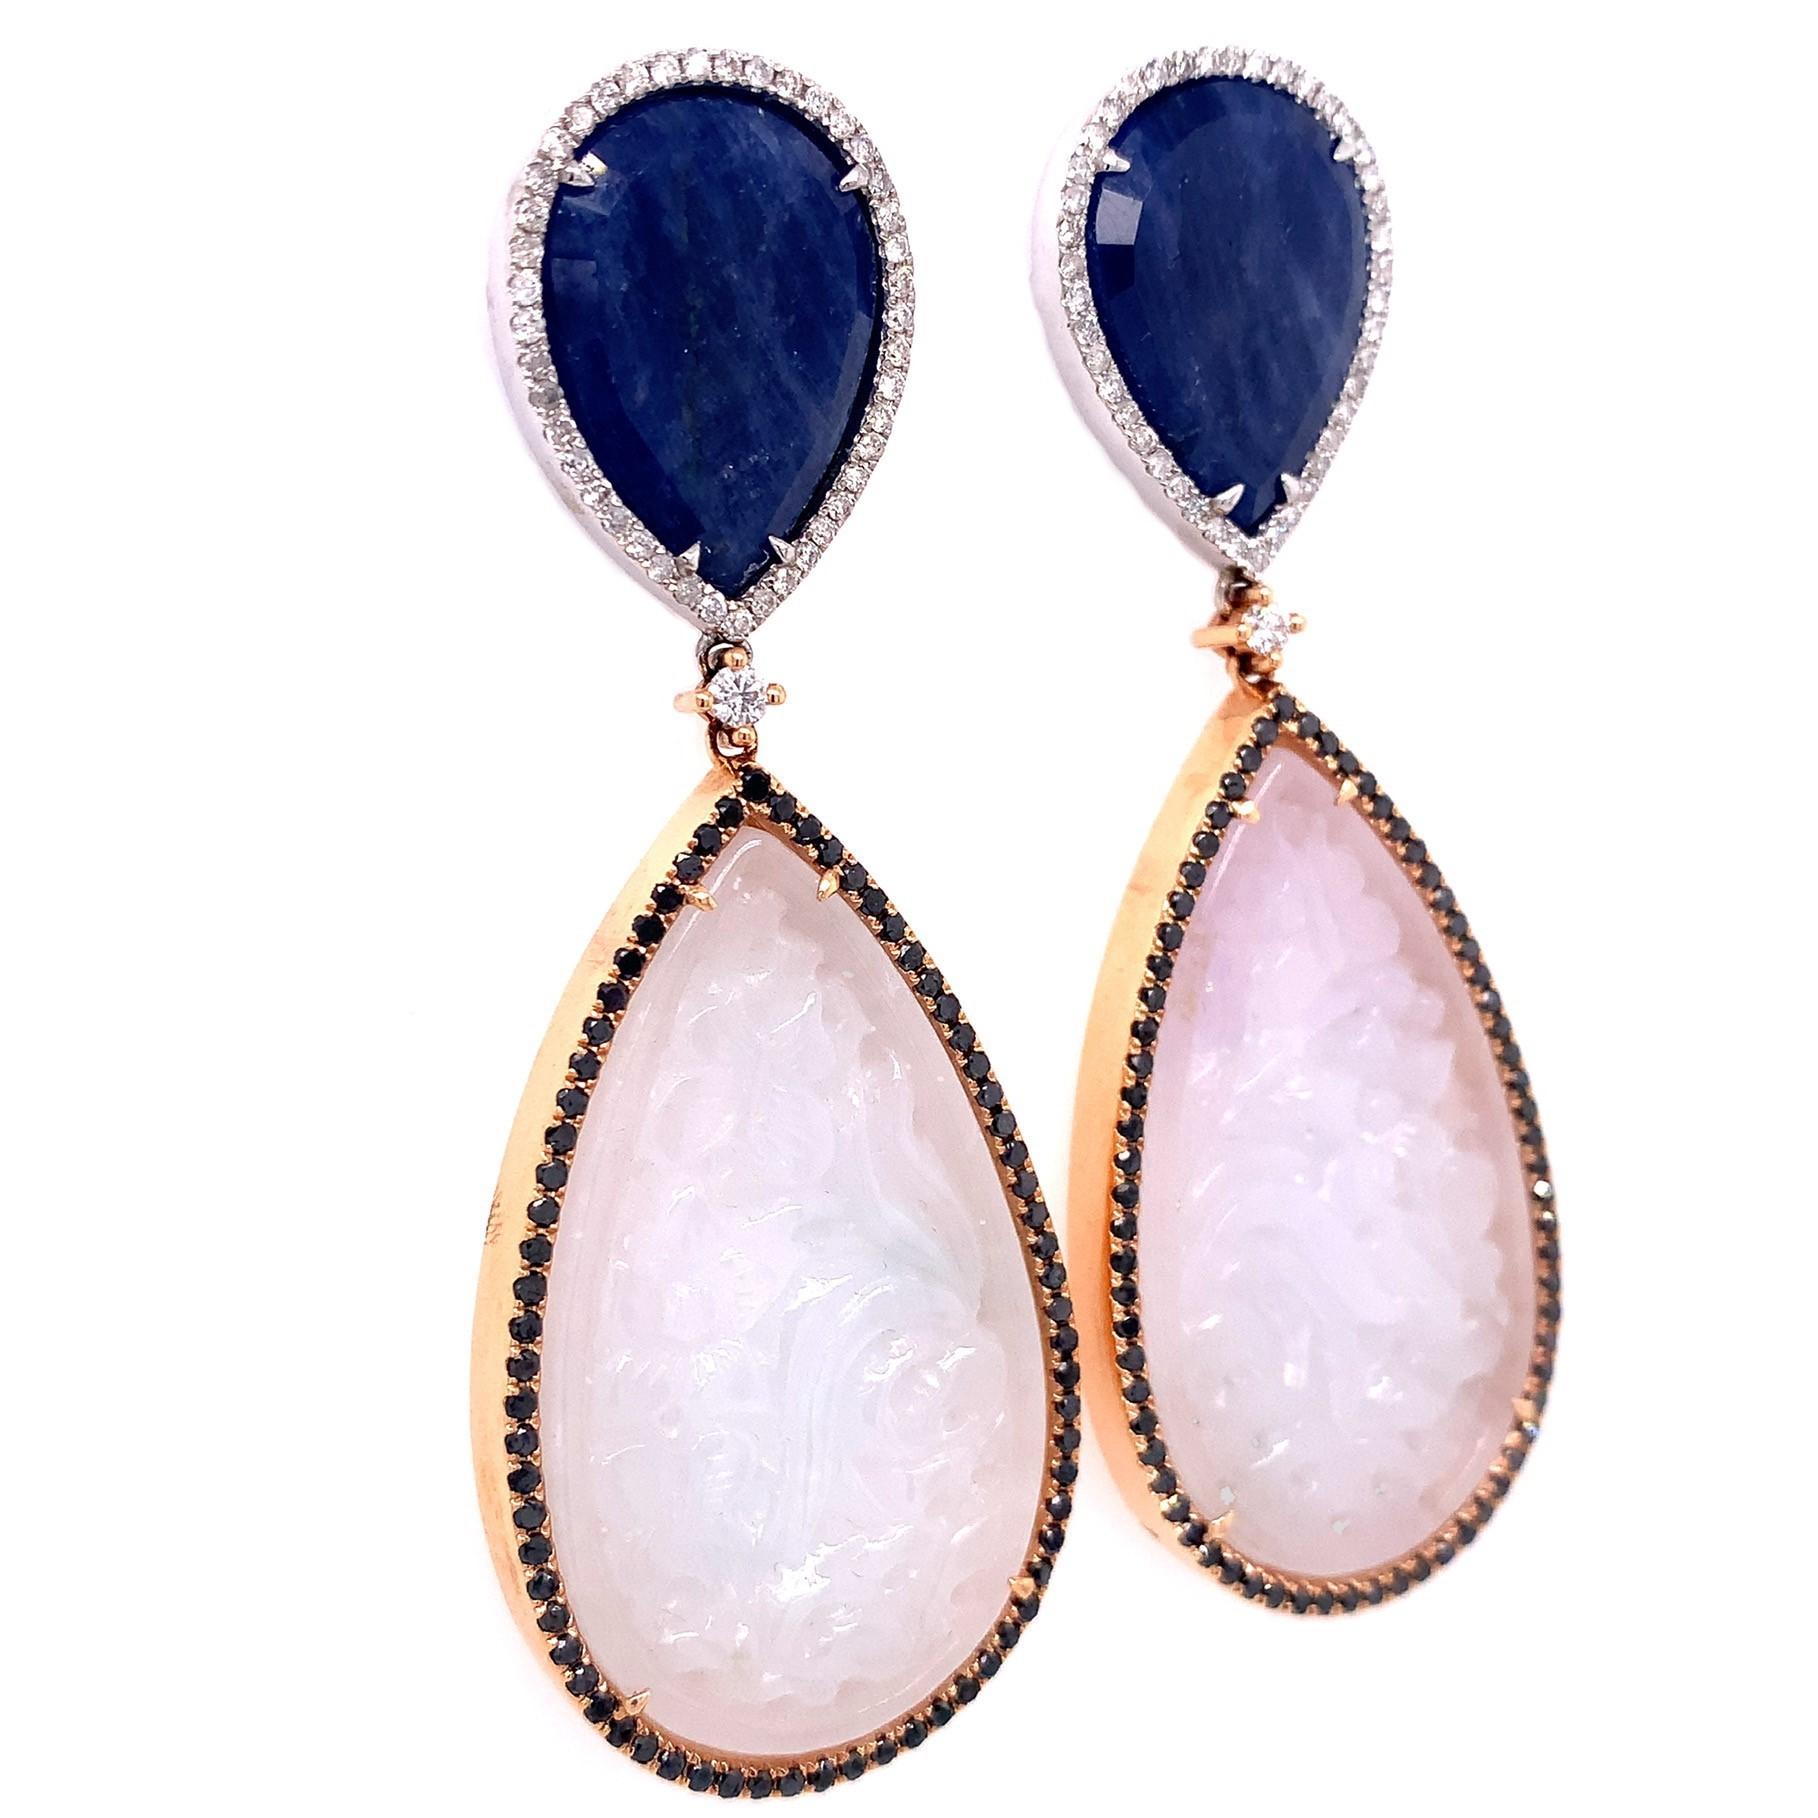 Lillipad Collection,

Intricately hand carved pure colored Jade earrings with diamonds and Blue Sapphire on top set in 18k two tone gold.

Blue Sapphire: 29.59 ct total weight.
Jade: 71.53 ct total weight.
Diamond : 0.77ct total weight.
All diamonds